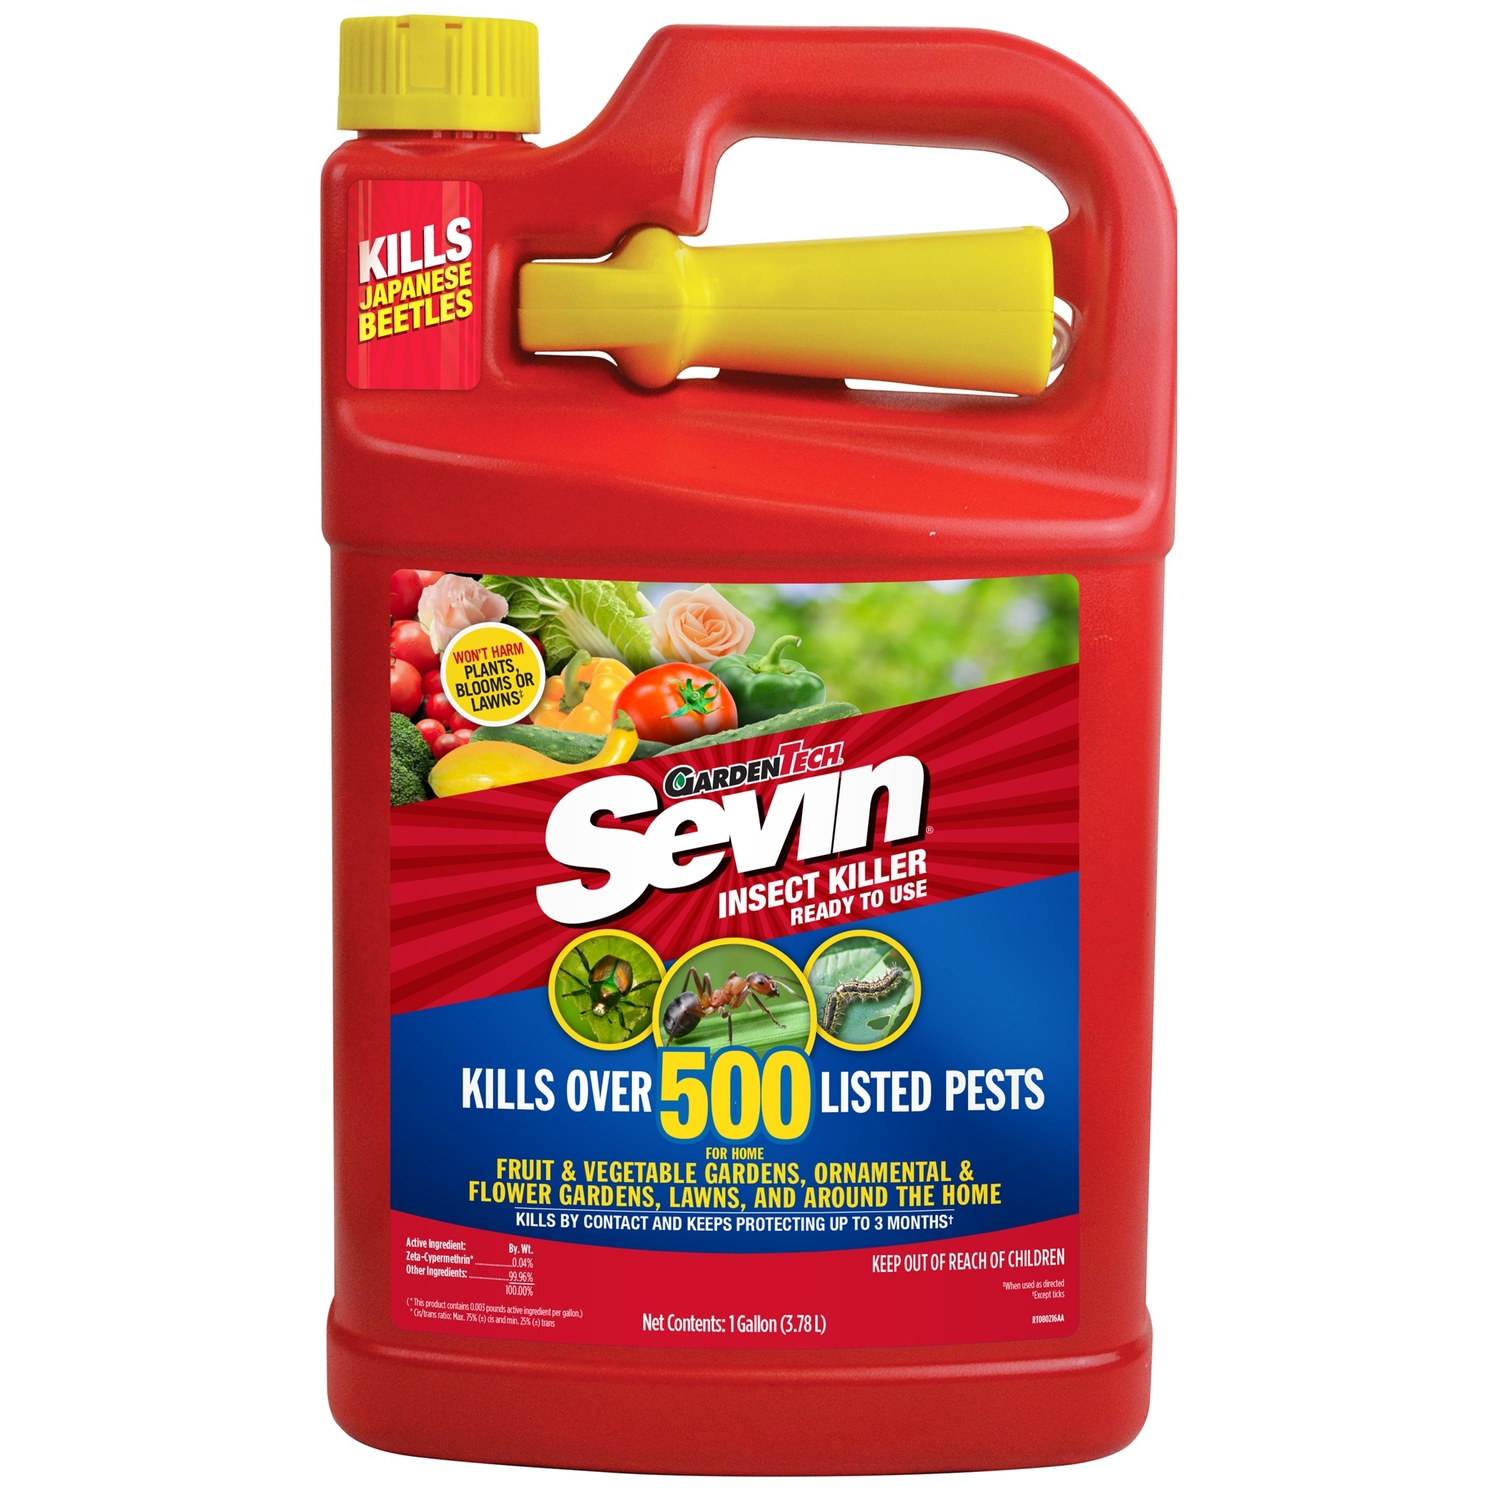 UPC 613499010124 product image for Sevin Insect Killer 1 gal. | upcitemdb.com